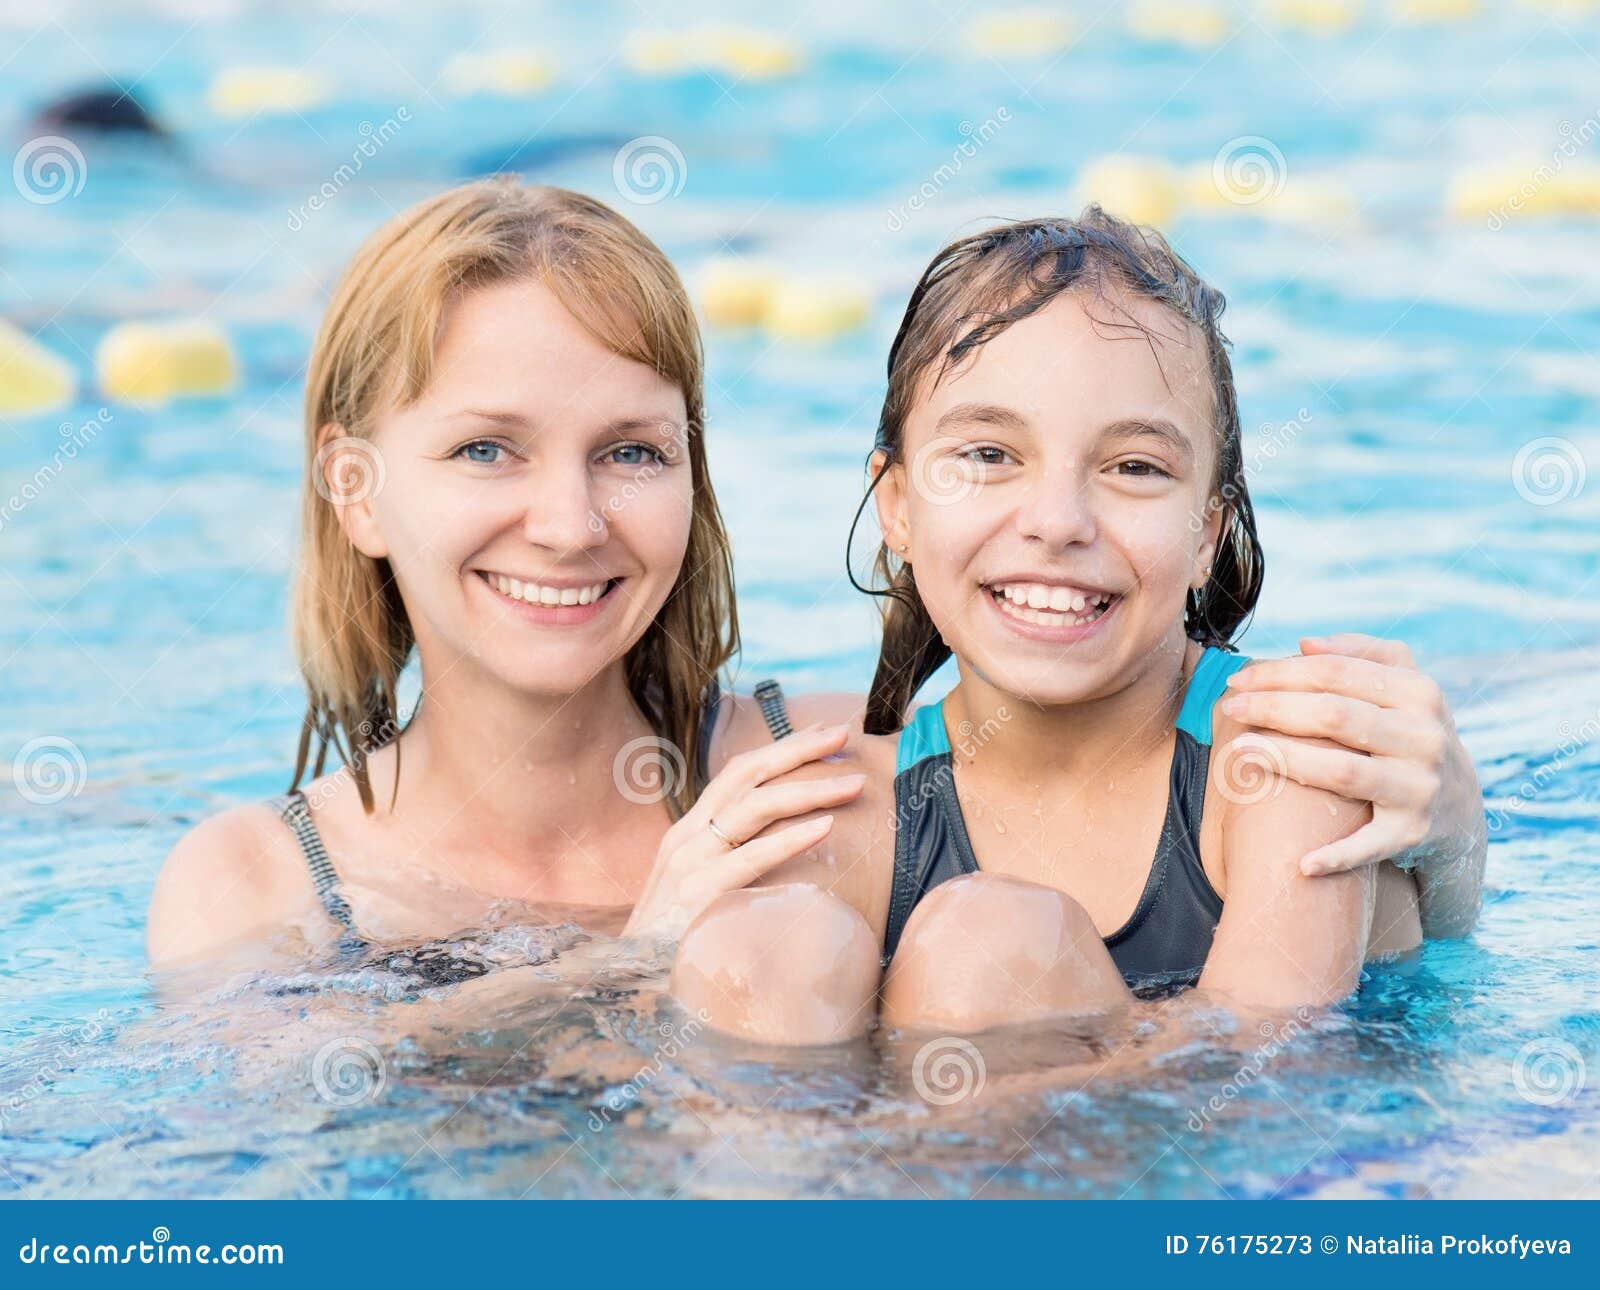 Mother And Daughter In Pool Stock Image - Image of daughter, parent